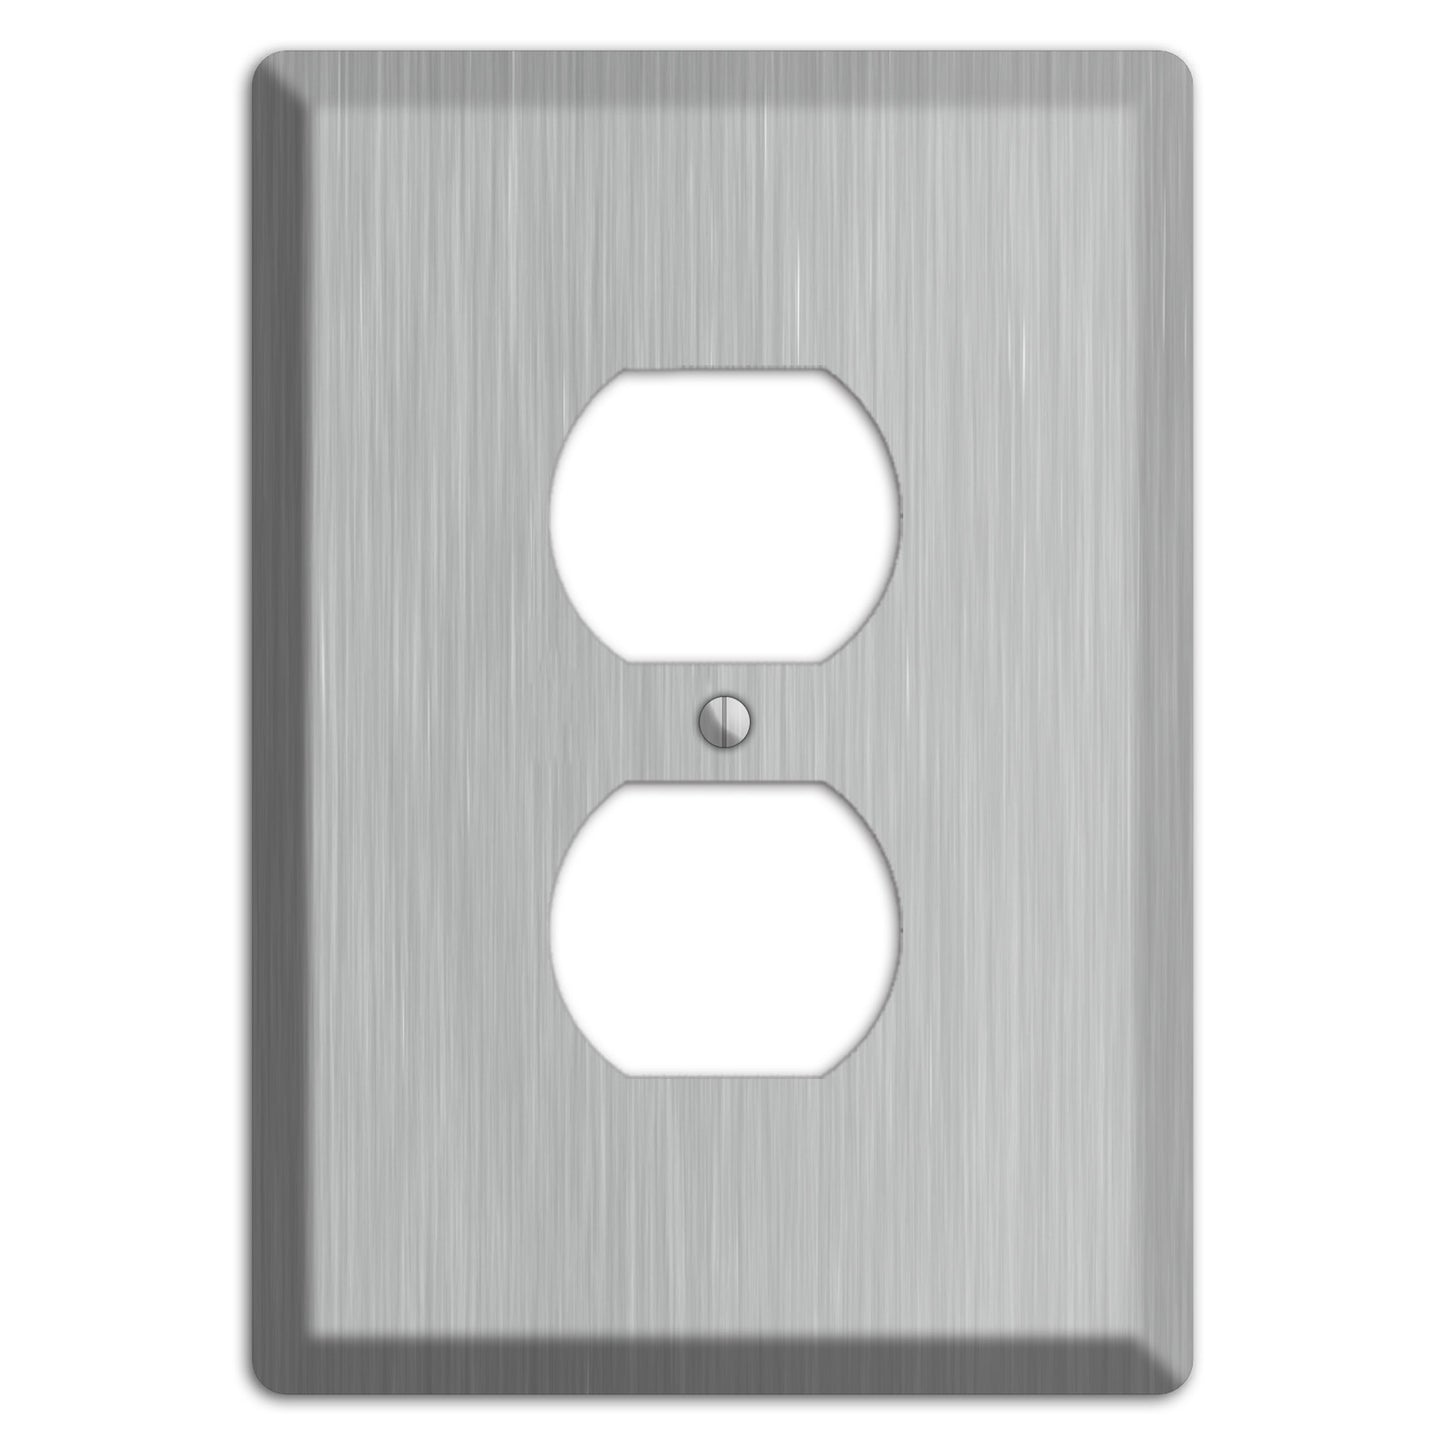 Brushed Stainless Steel Duplex Outlet Wallplate